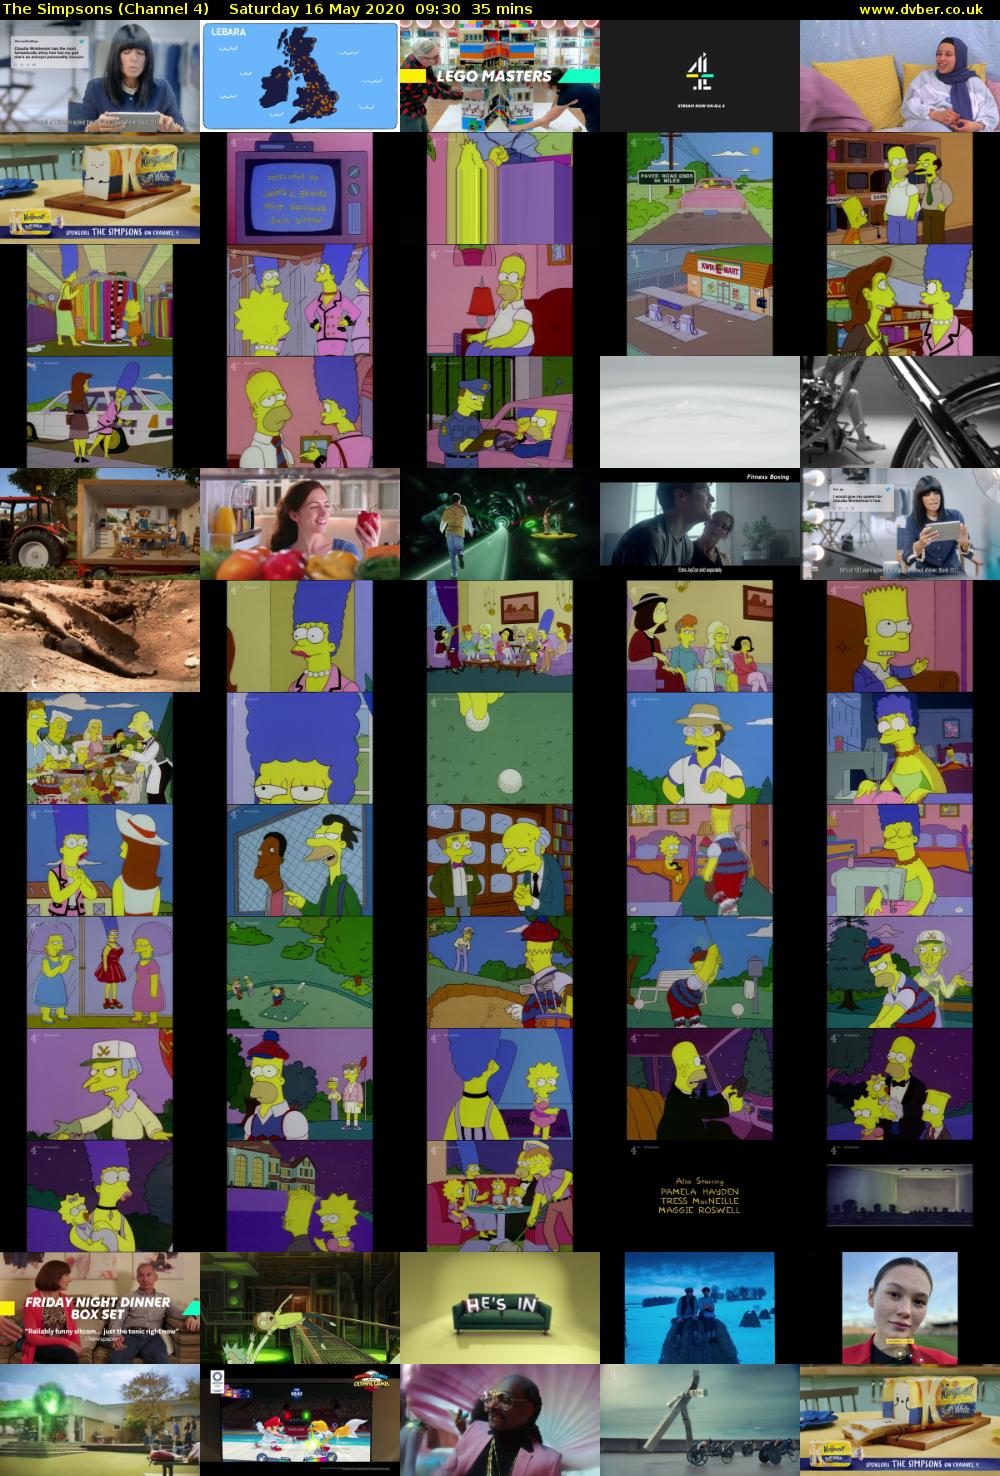 The Simpsons (Channel 4) Saturday 16 May 2020 09:30 - 10:05